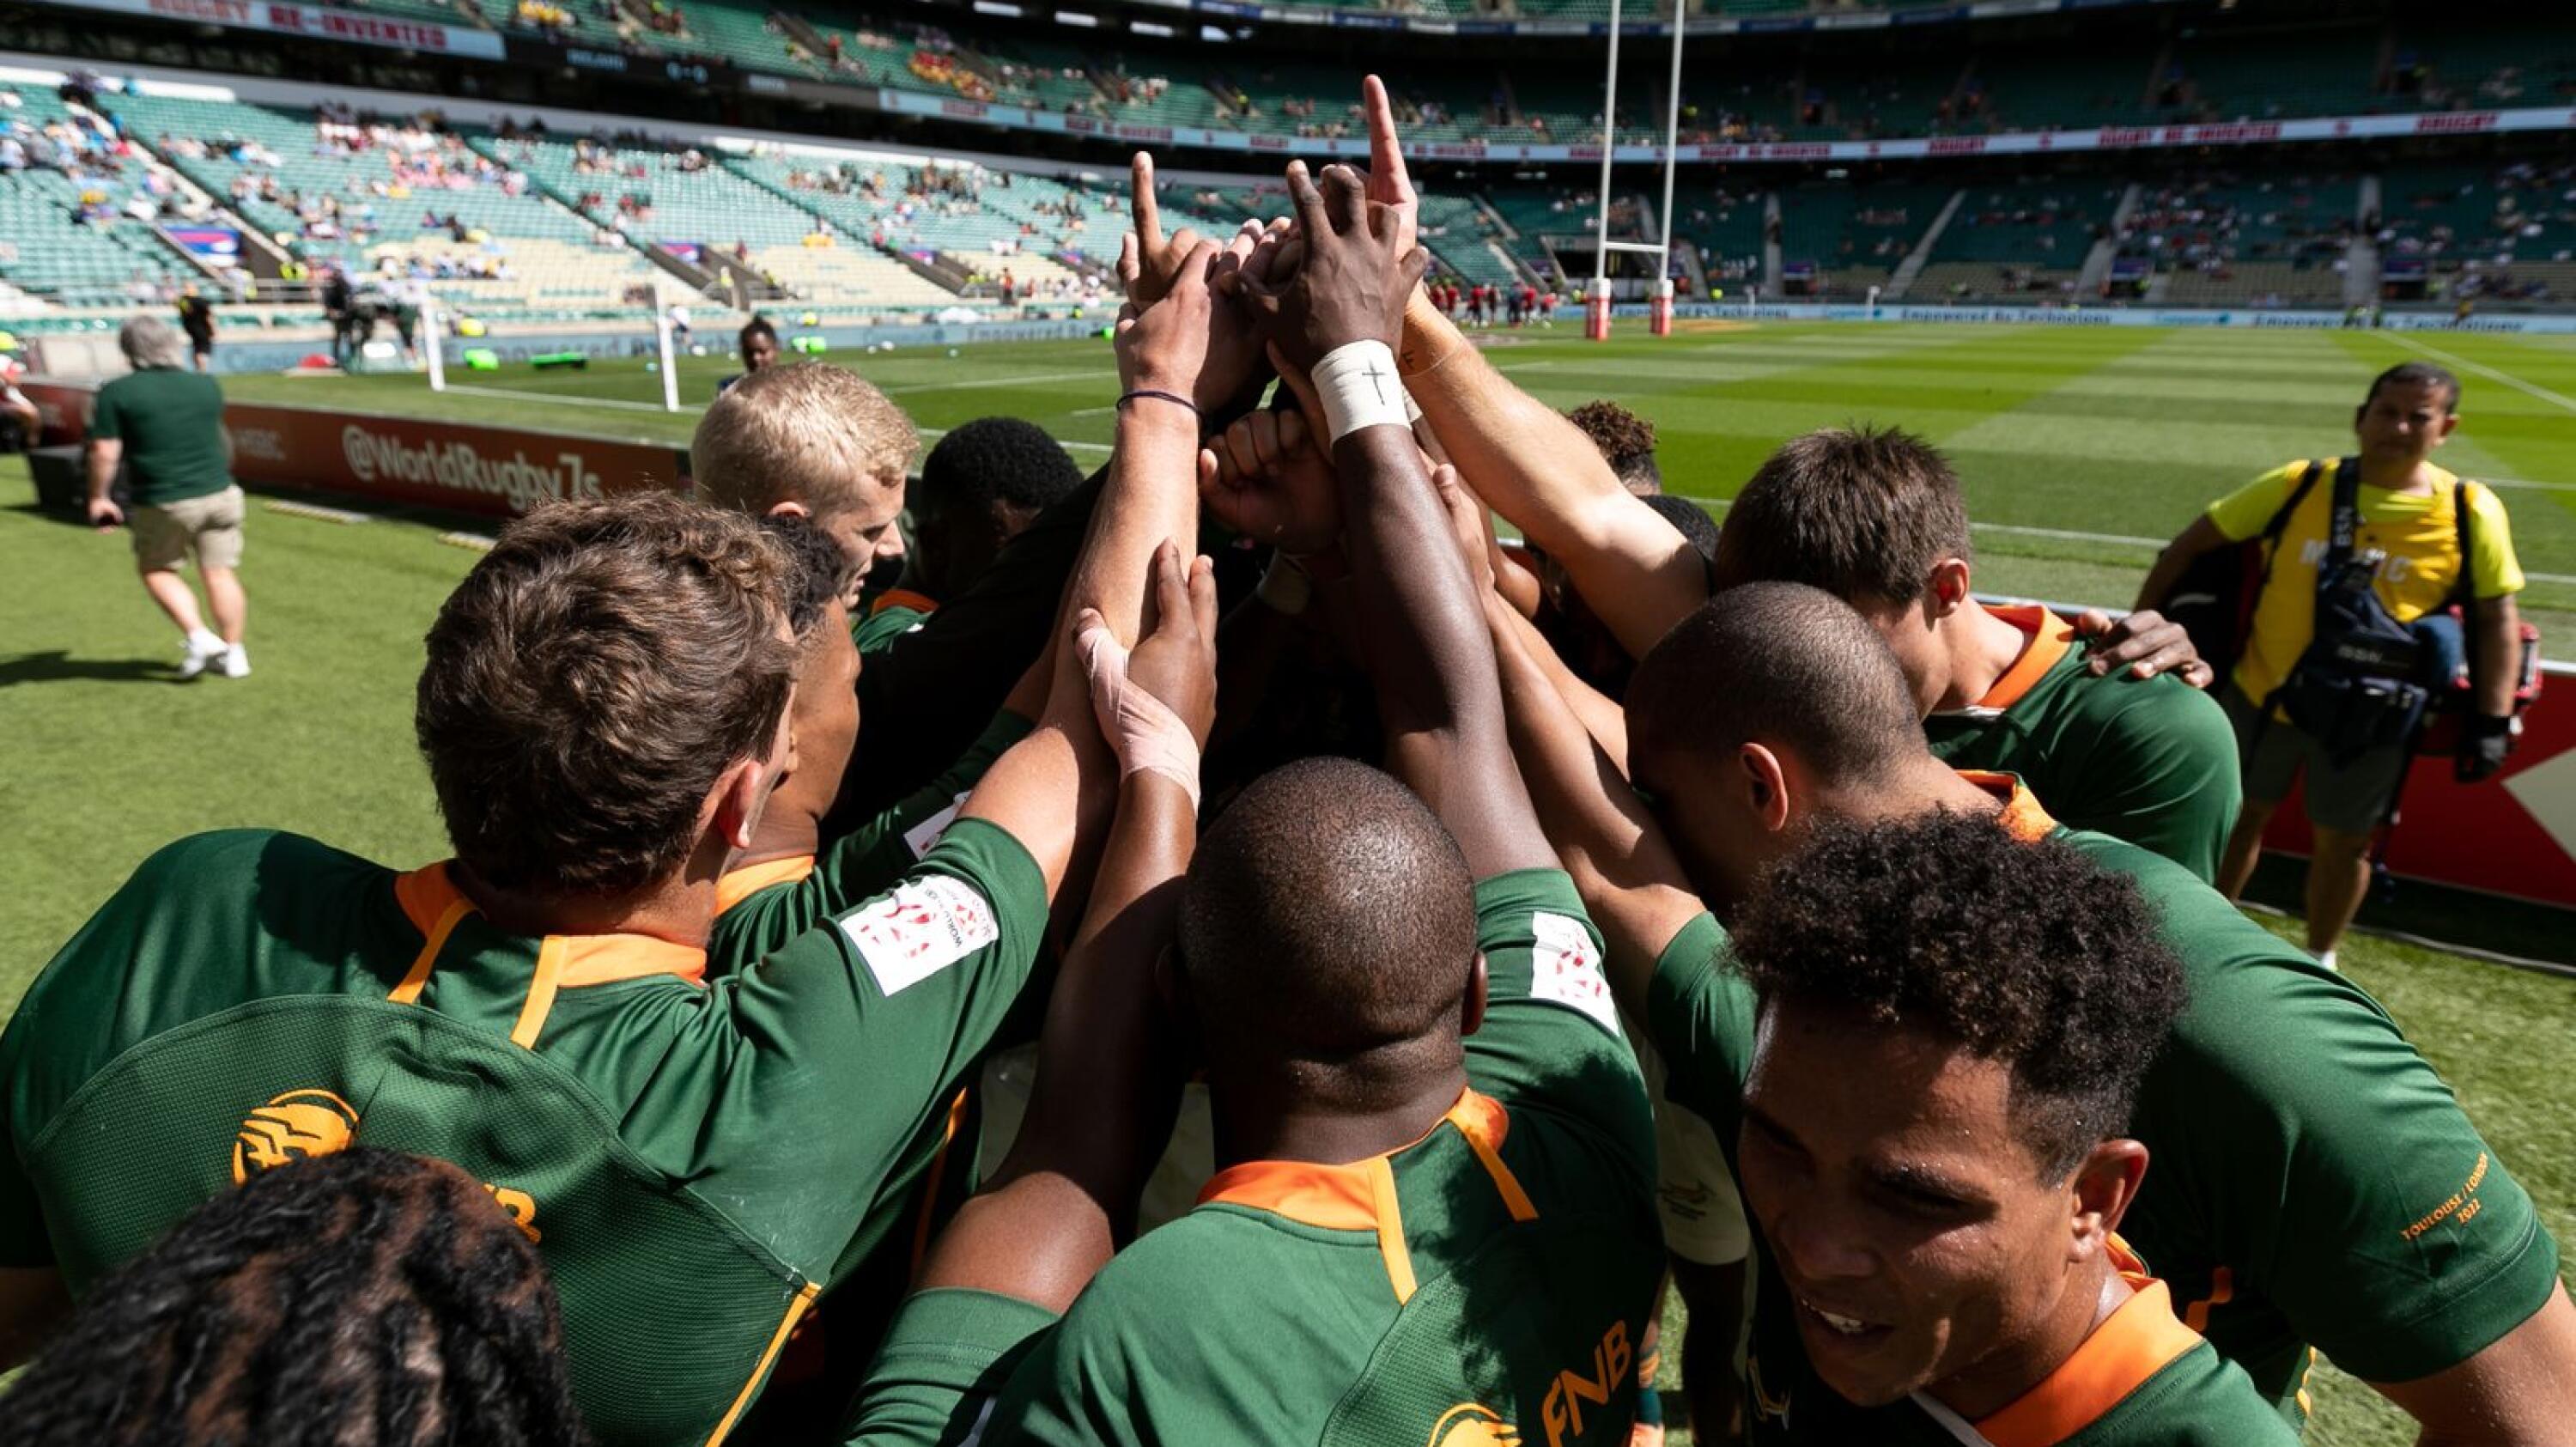 The Blitzboks’ recovery in the World Sevens Series continued in their second match of the London Sevens on Saturday when they saw off Ireland 19-12